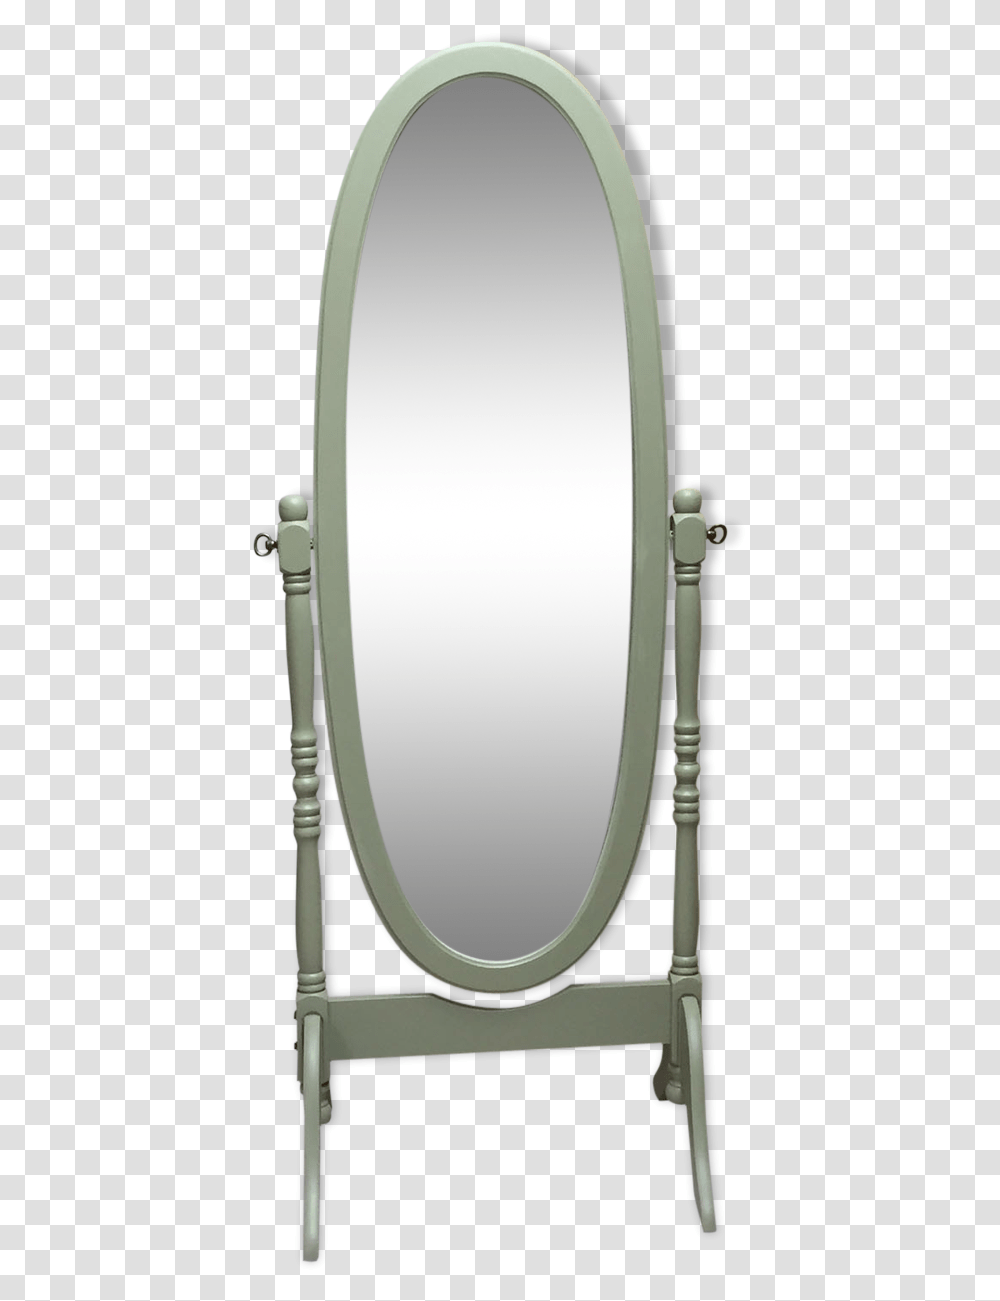 Psych Mirror, Chair, Furniture, Sink Faucet, Interior Design Transparent Png